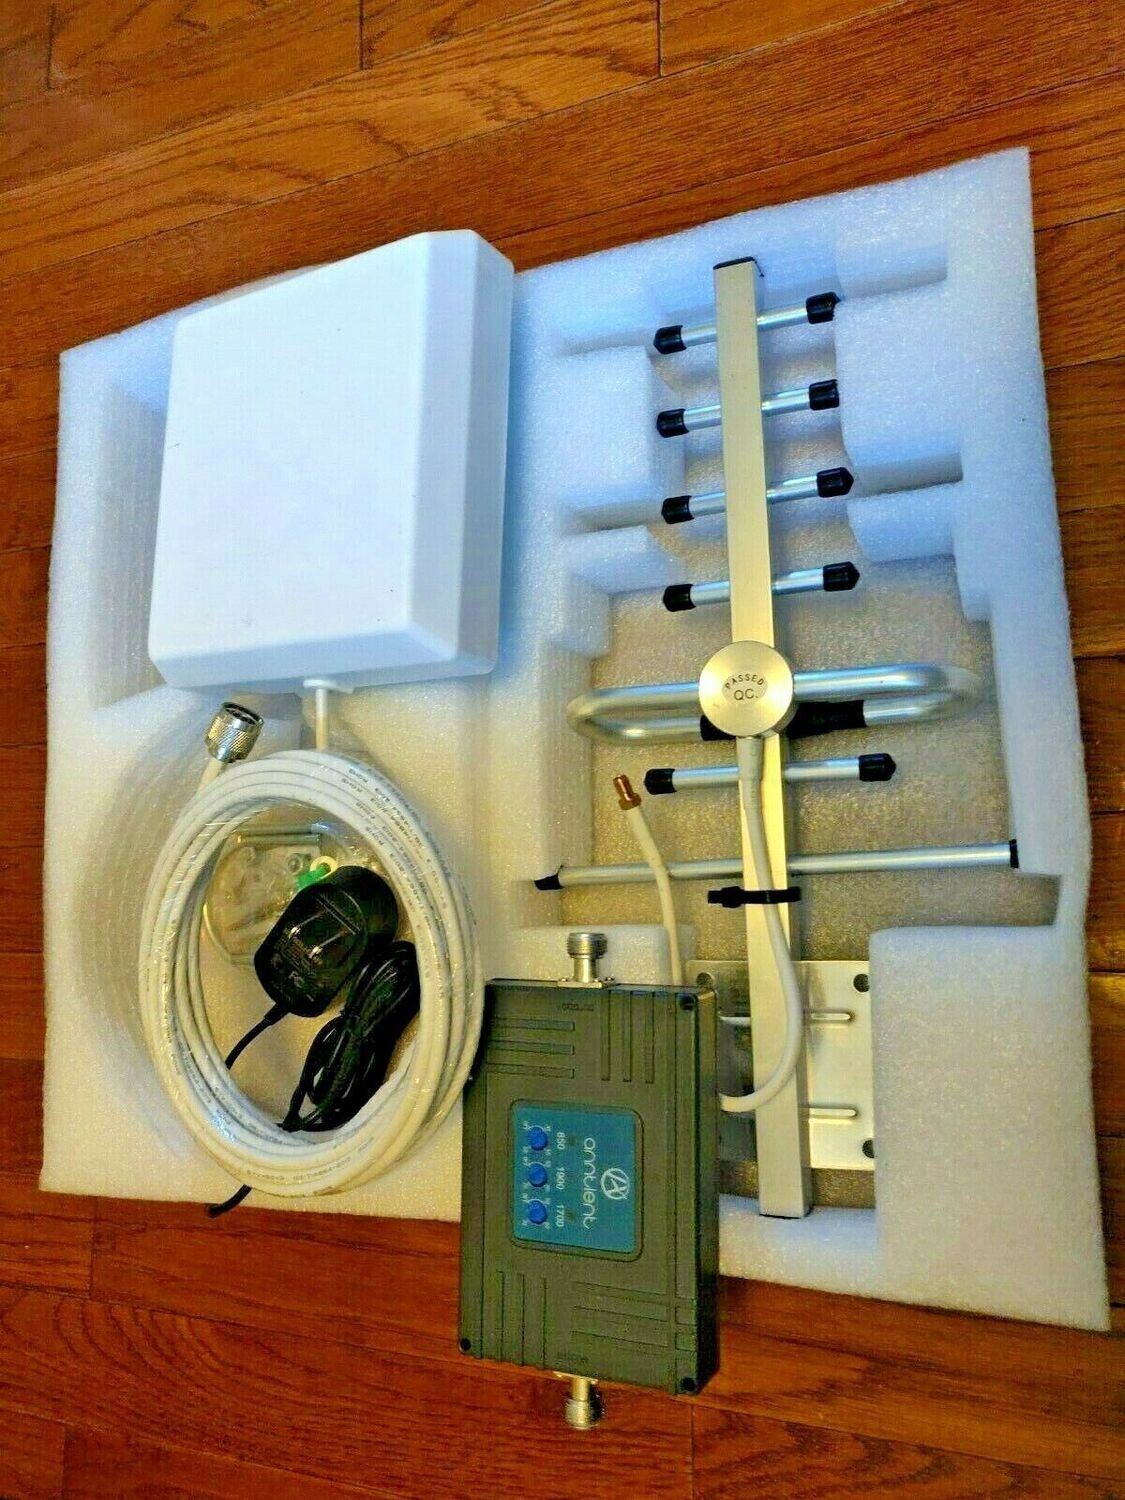 Cell Phone Signal Booster 3G 4G LTE 850/1700/1900MHz Band 5/4/2 for All Carriers